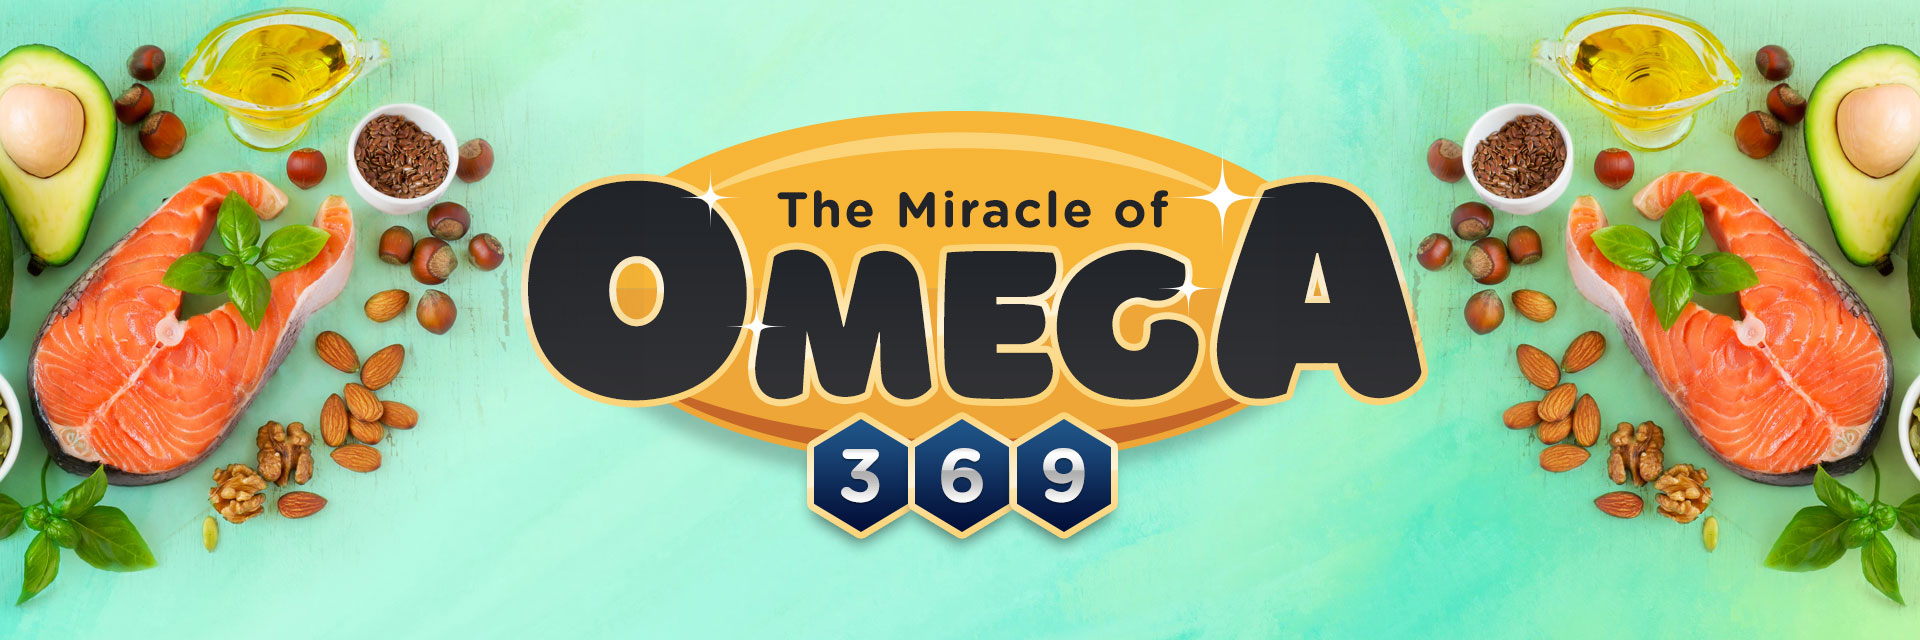 The Miracle of OMEGA